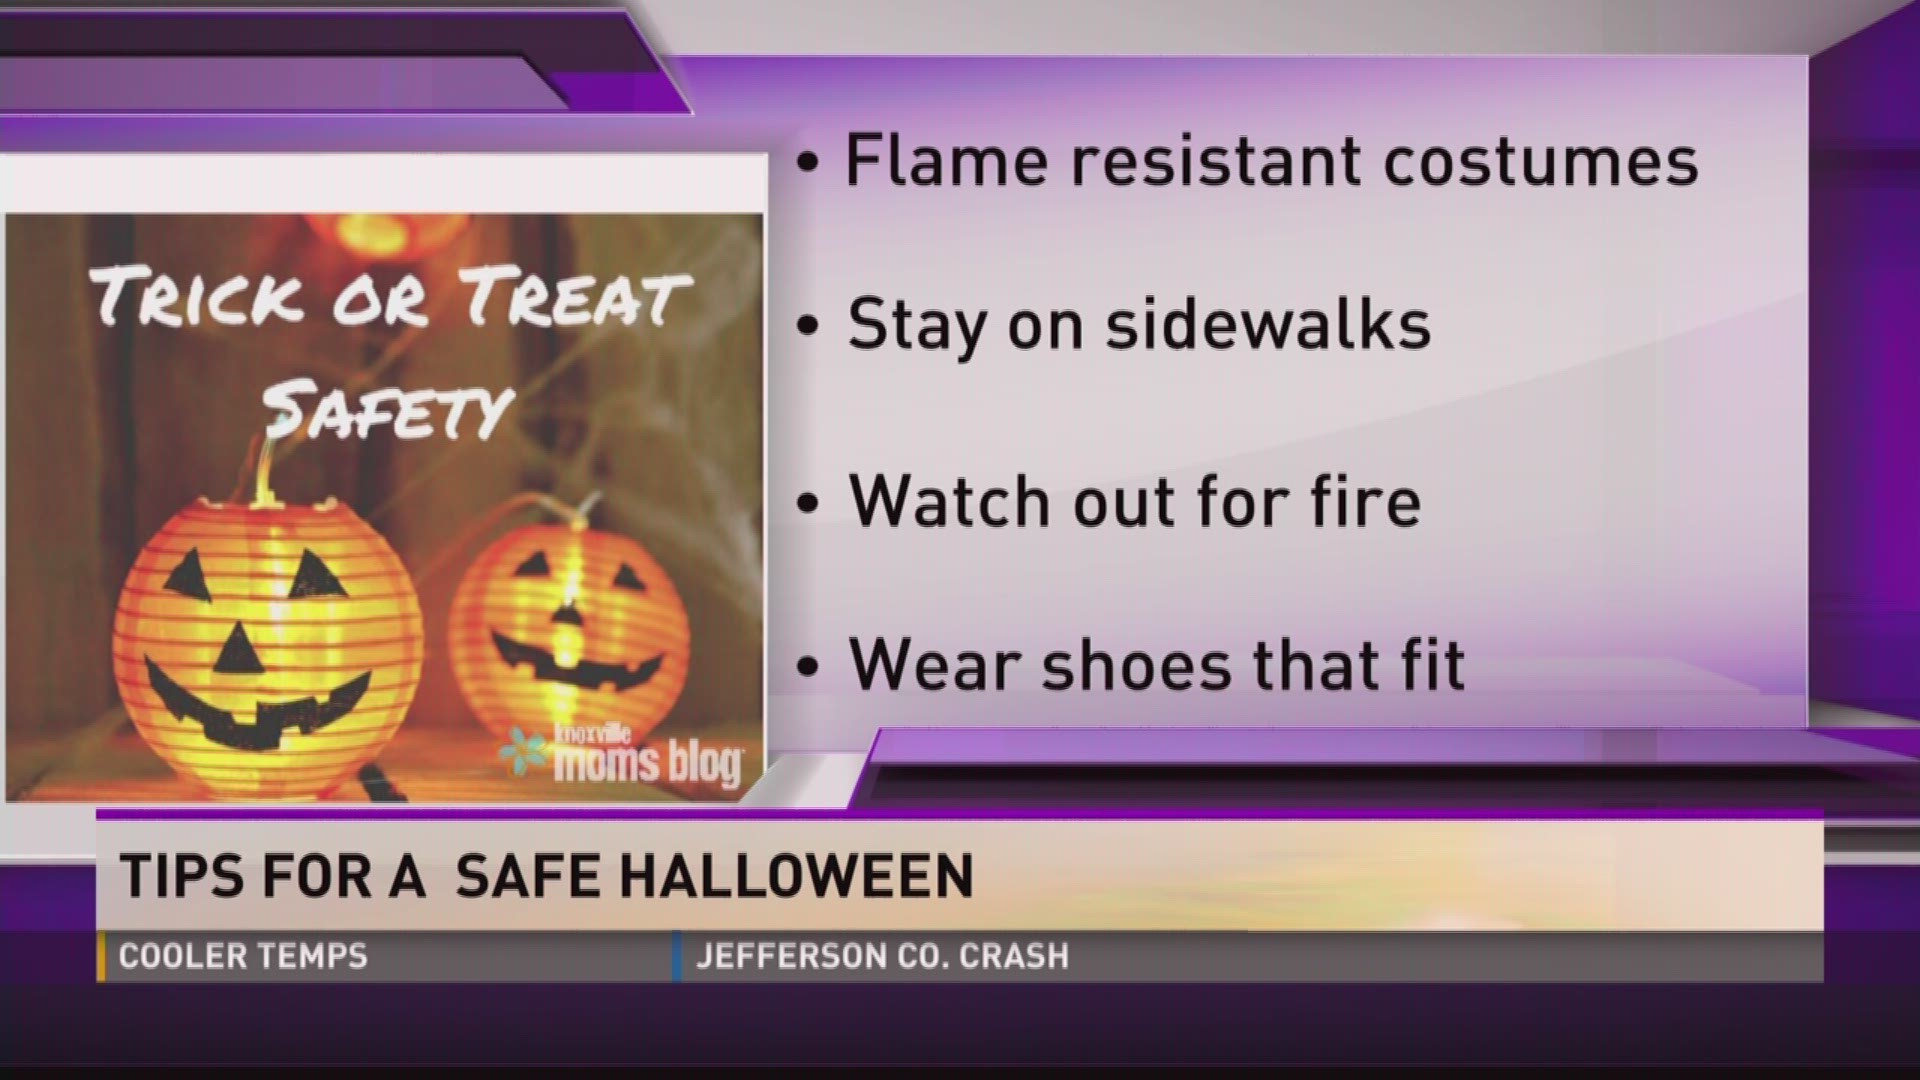 Tips for a Safe Halloween